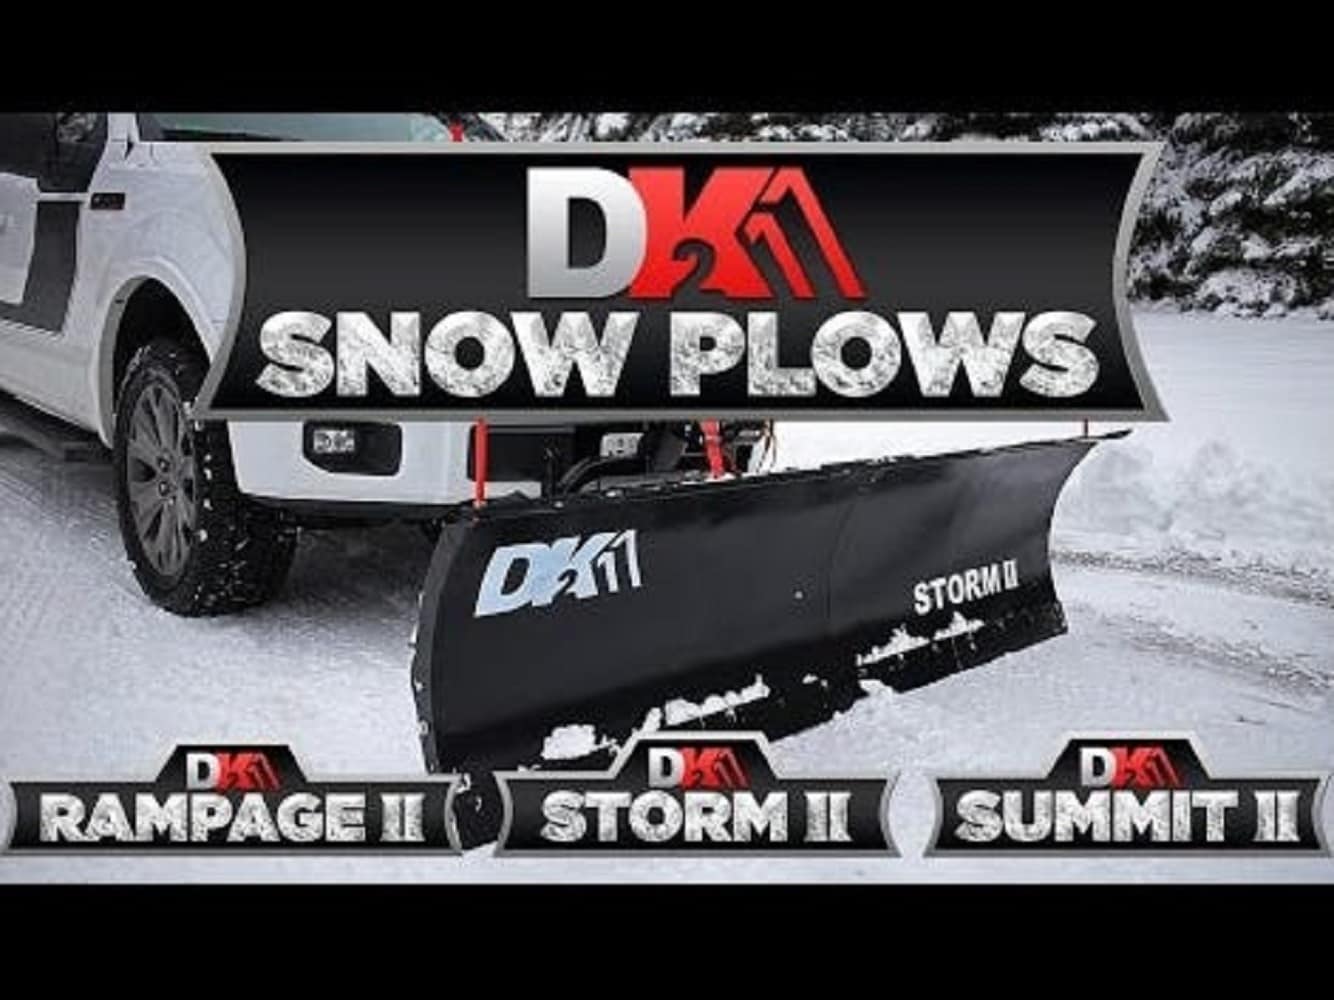 DK2 Rampage 82-in W x 19-in H Steel Snow Plow in the Snow Plows department  at